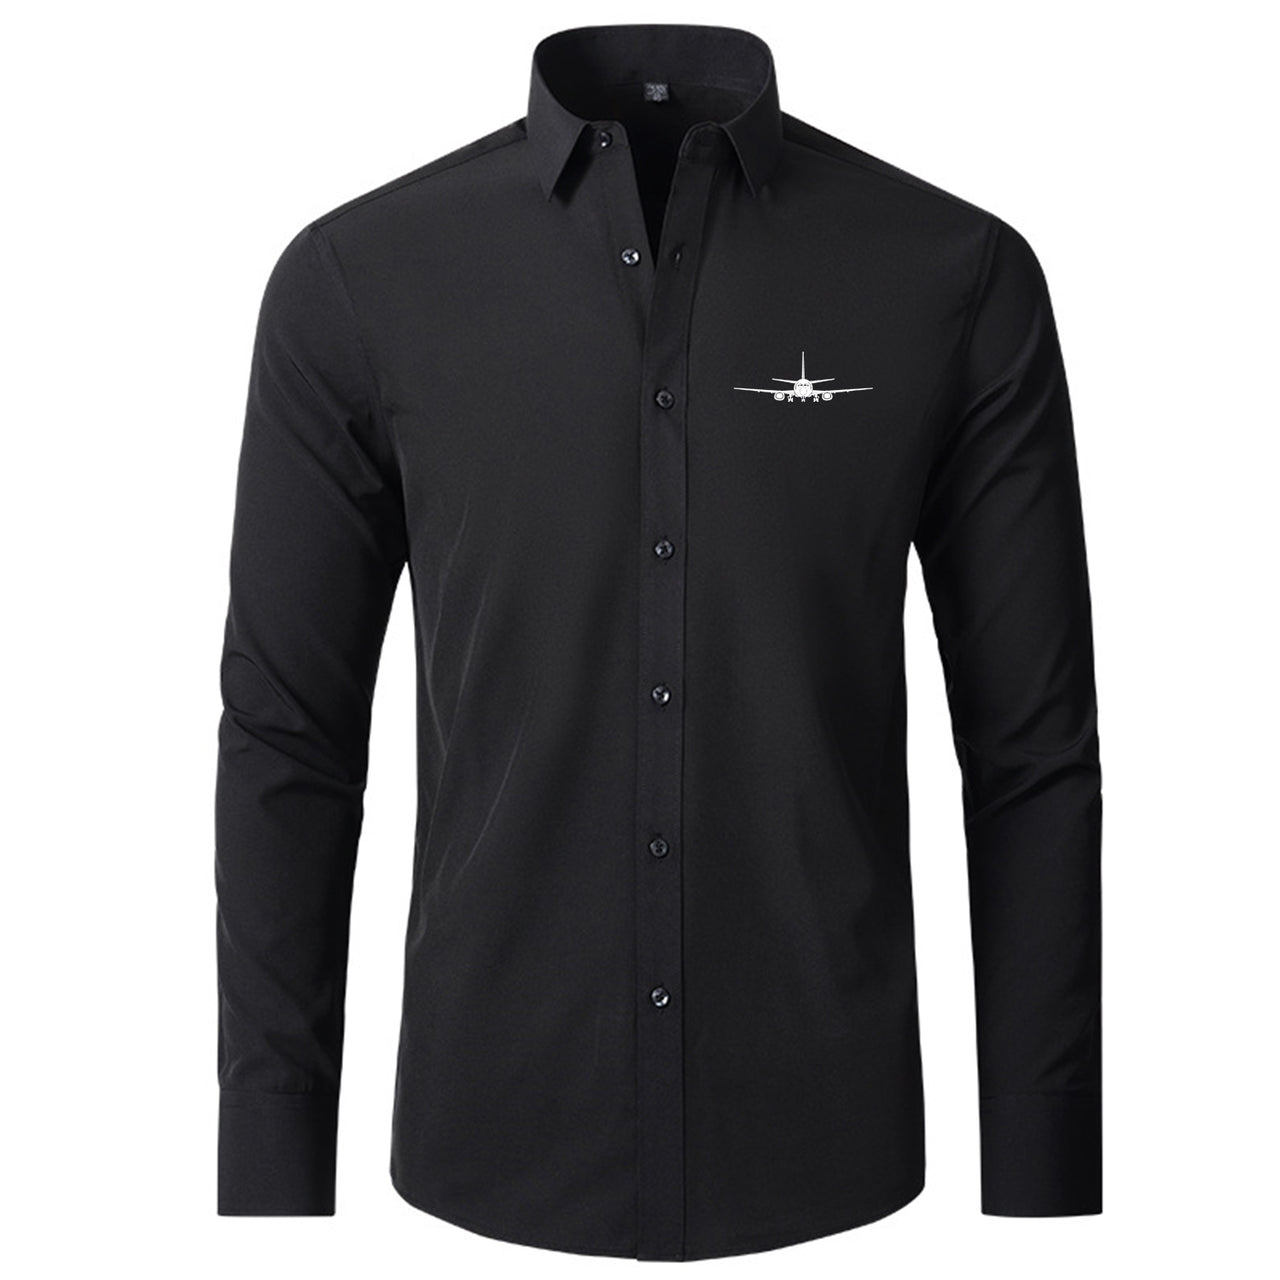 Boeing 737 Silhouette Designed Long Sleeve Shirts